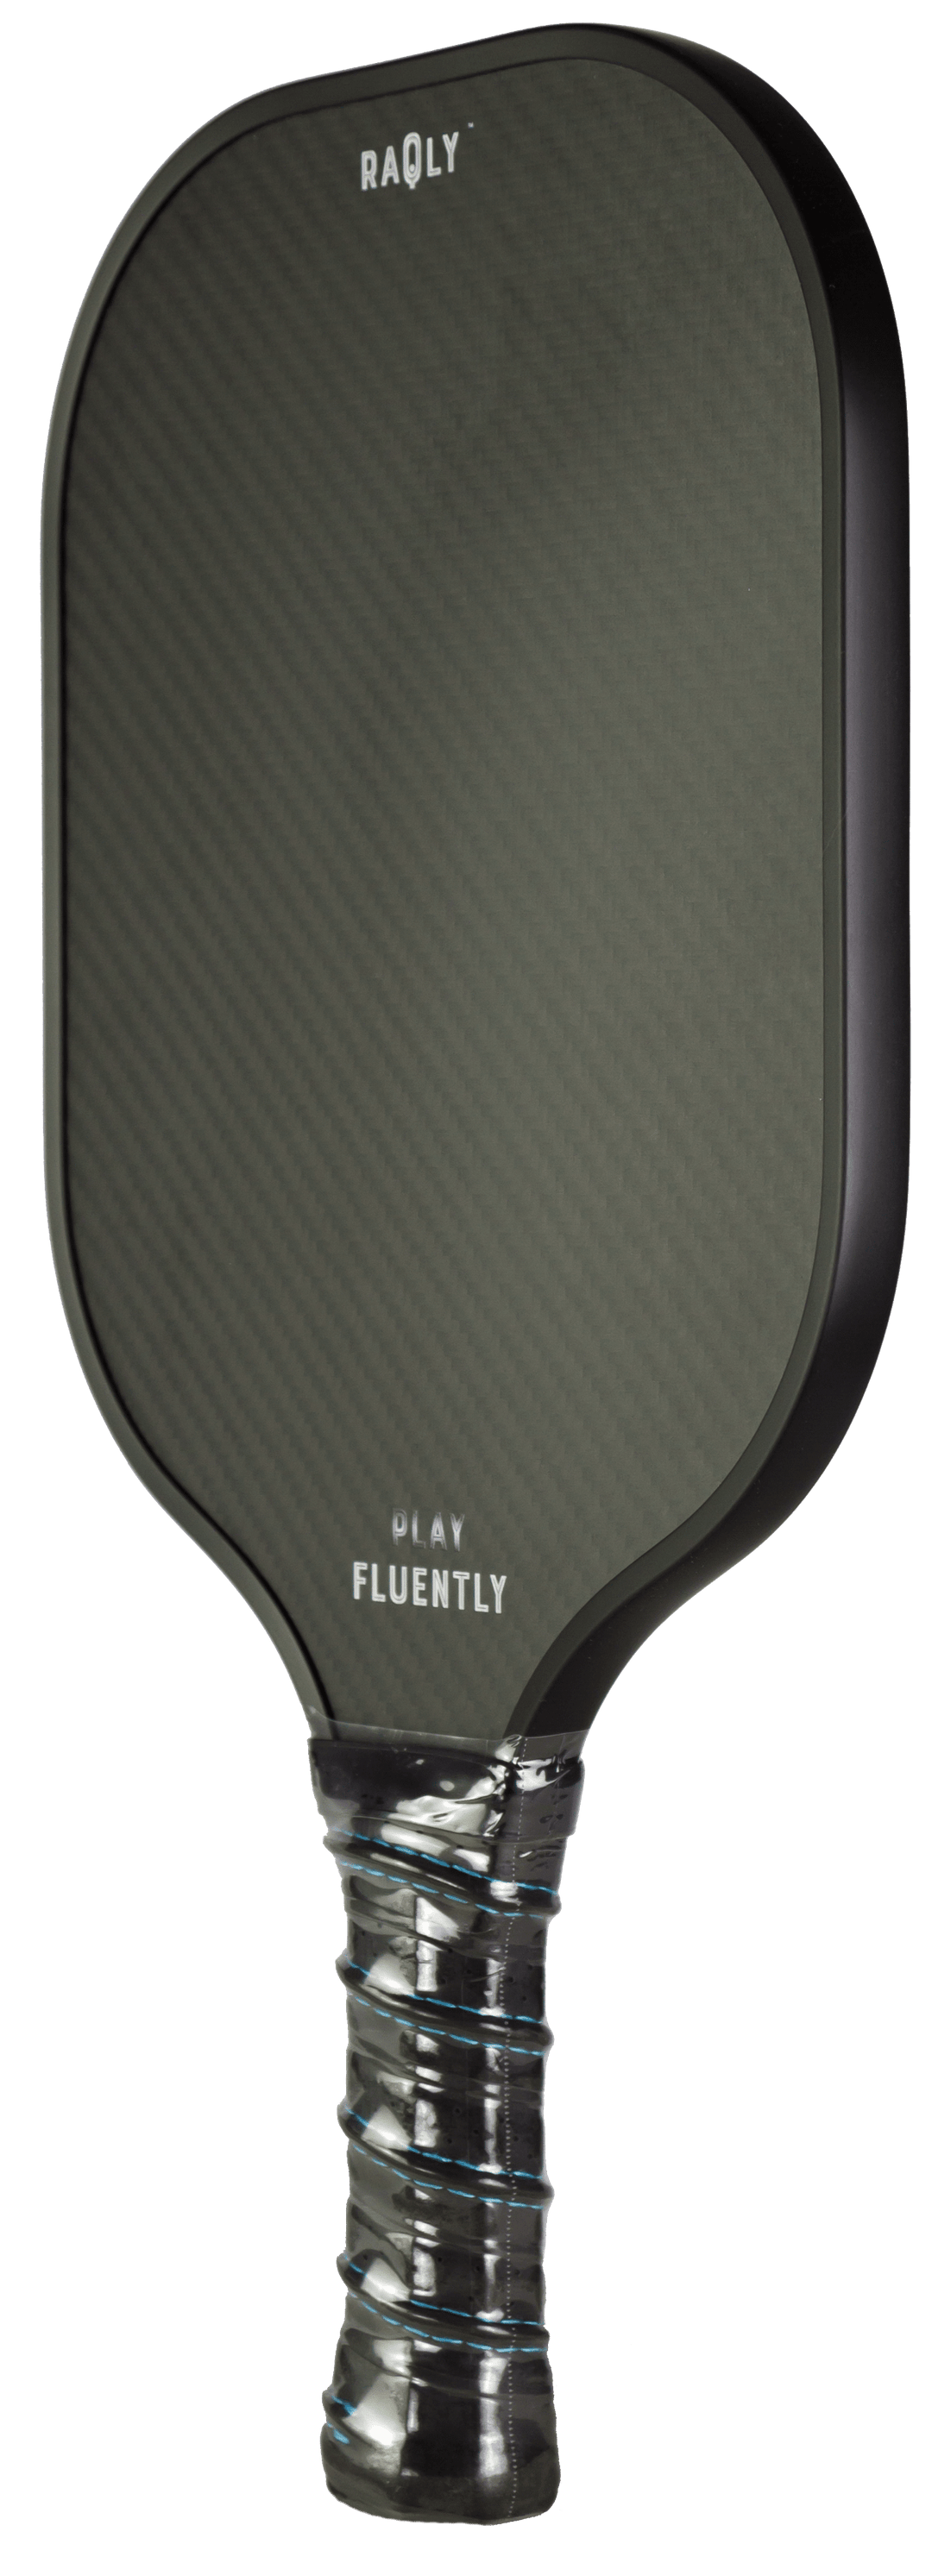 RAQLY Play Fluently 3K Carbon Pickleball Paddle Pickleball Paddles RAQLY 